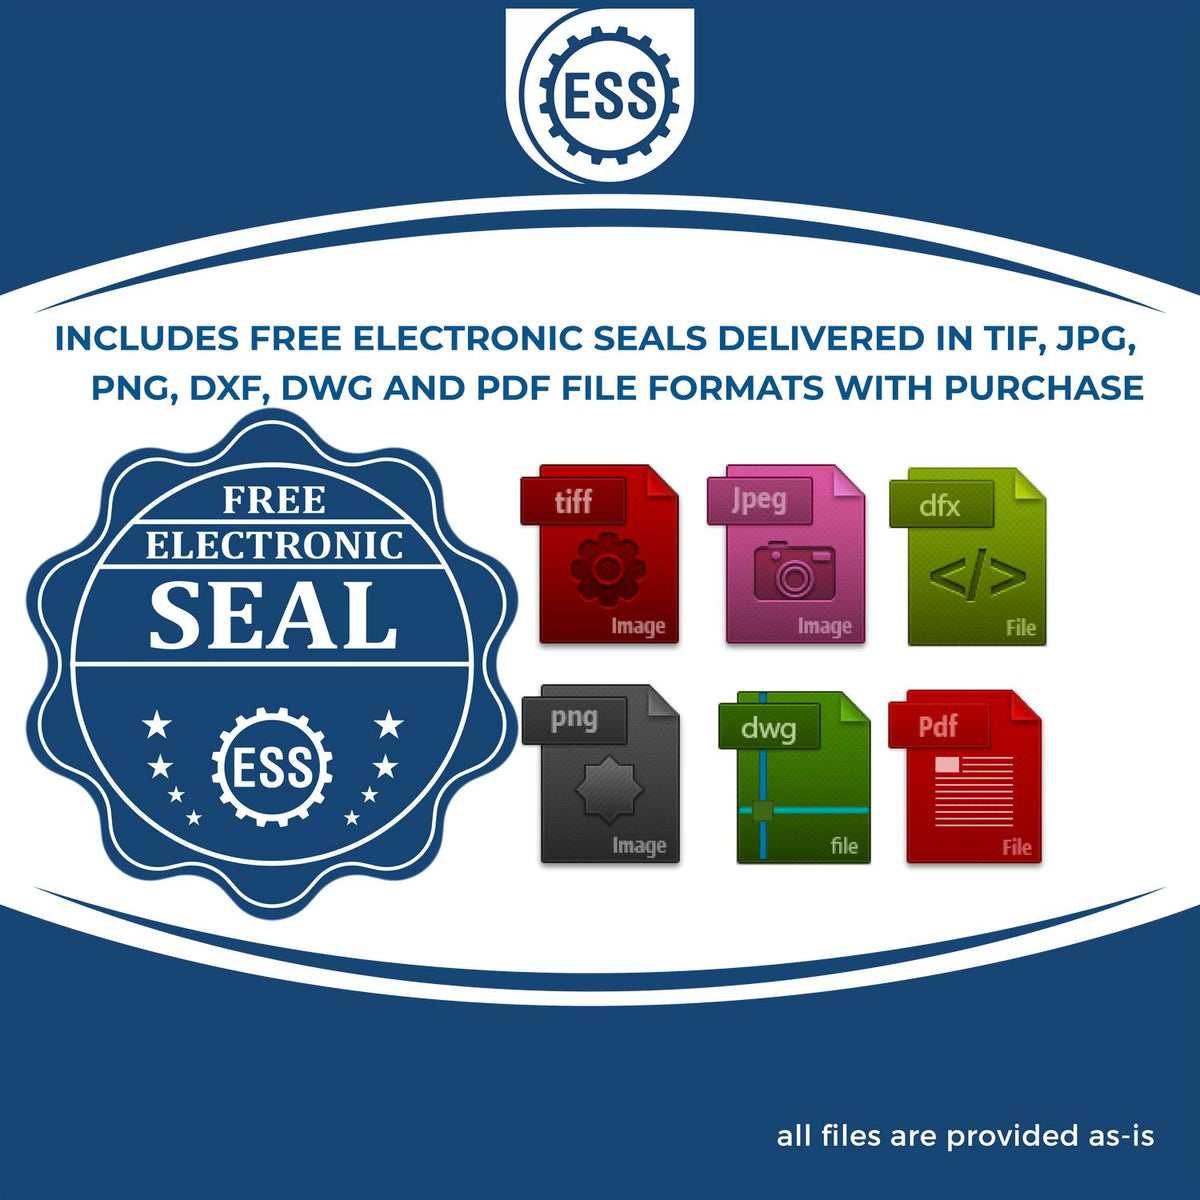 An infographic for the free electronic seal for the Hawaii Professional Engineer Seal Stamp illustrating the different file type icons such as DXF, DWG, TIF, JPG and PNG.